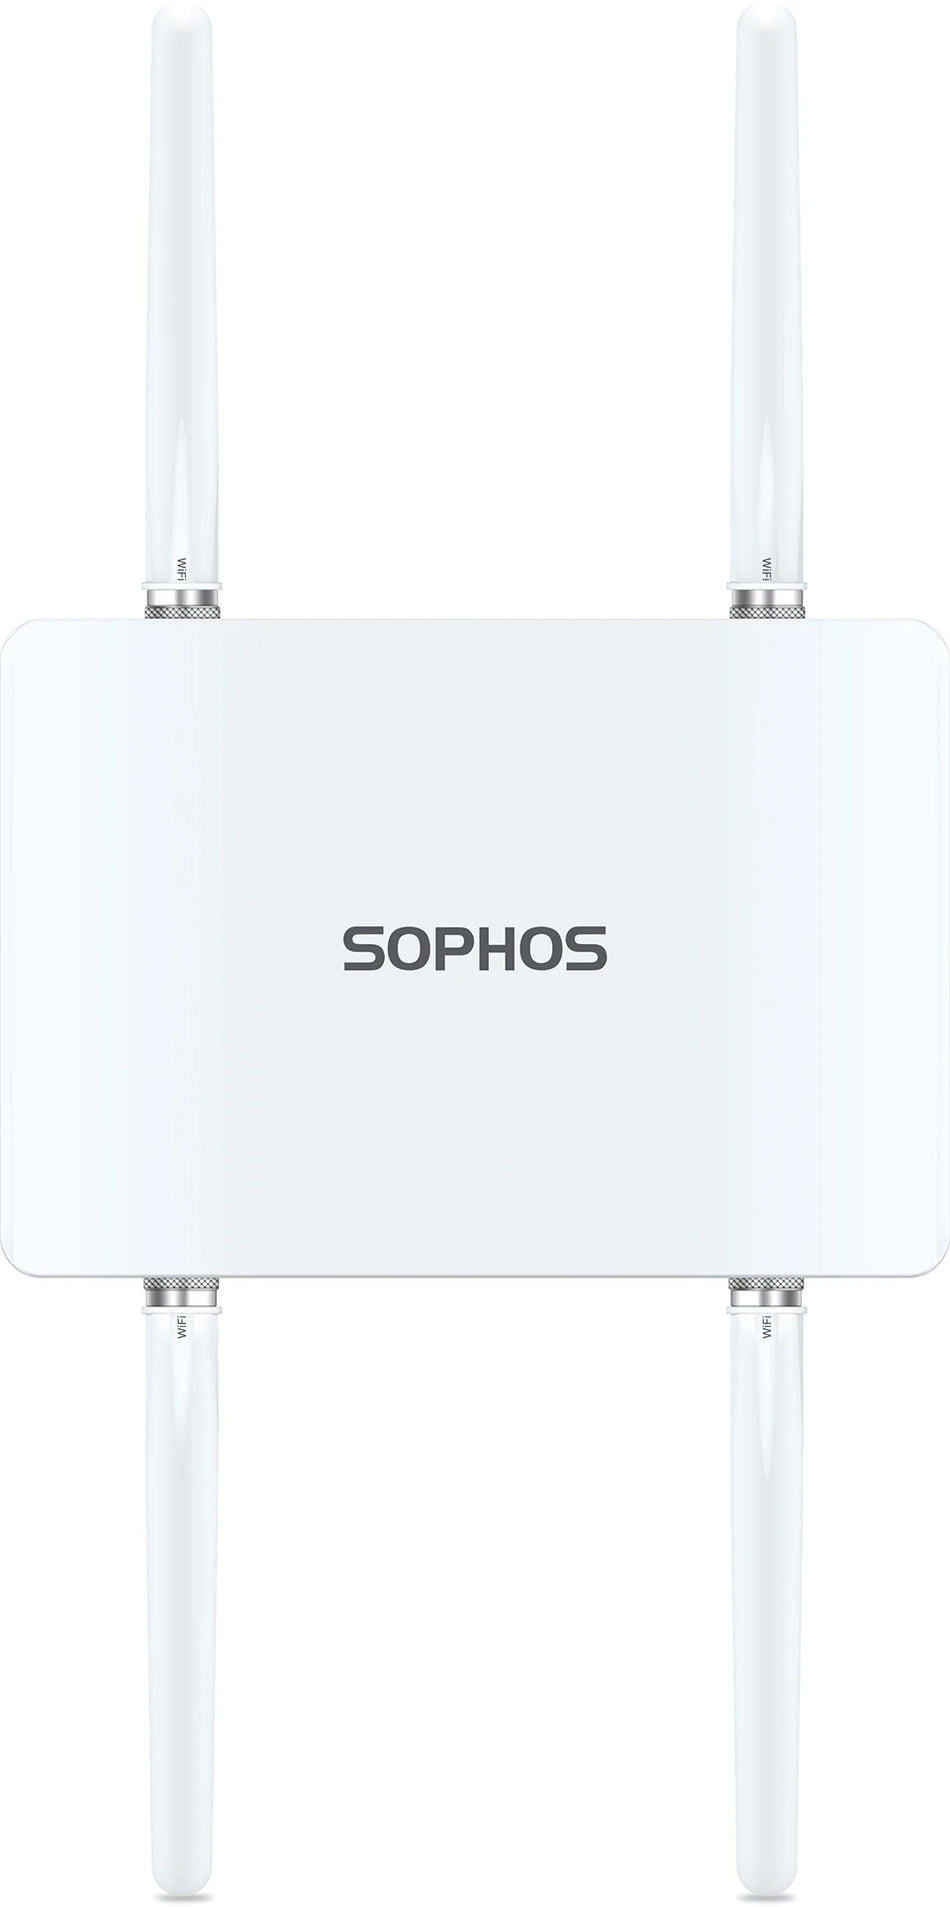 Sophos APX 320X (ETSI) outdoor access point plain, no power adapter/PoE Injector